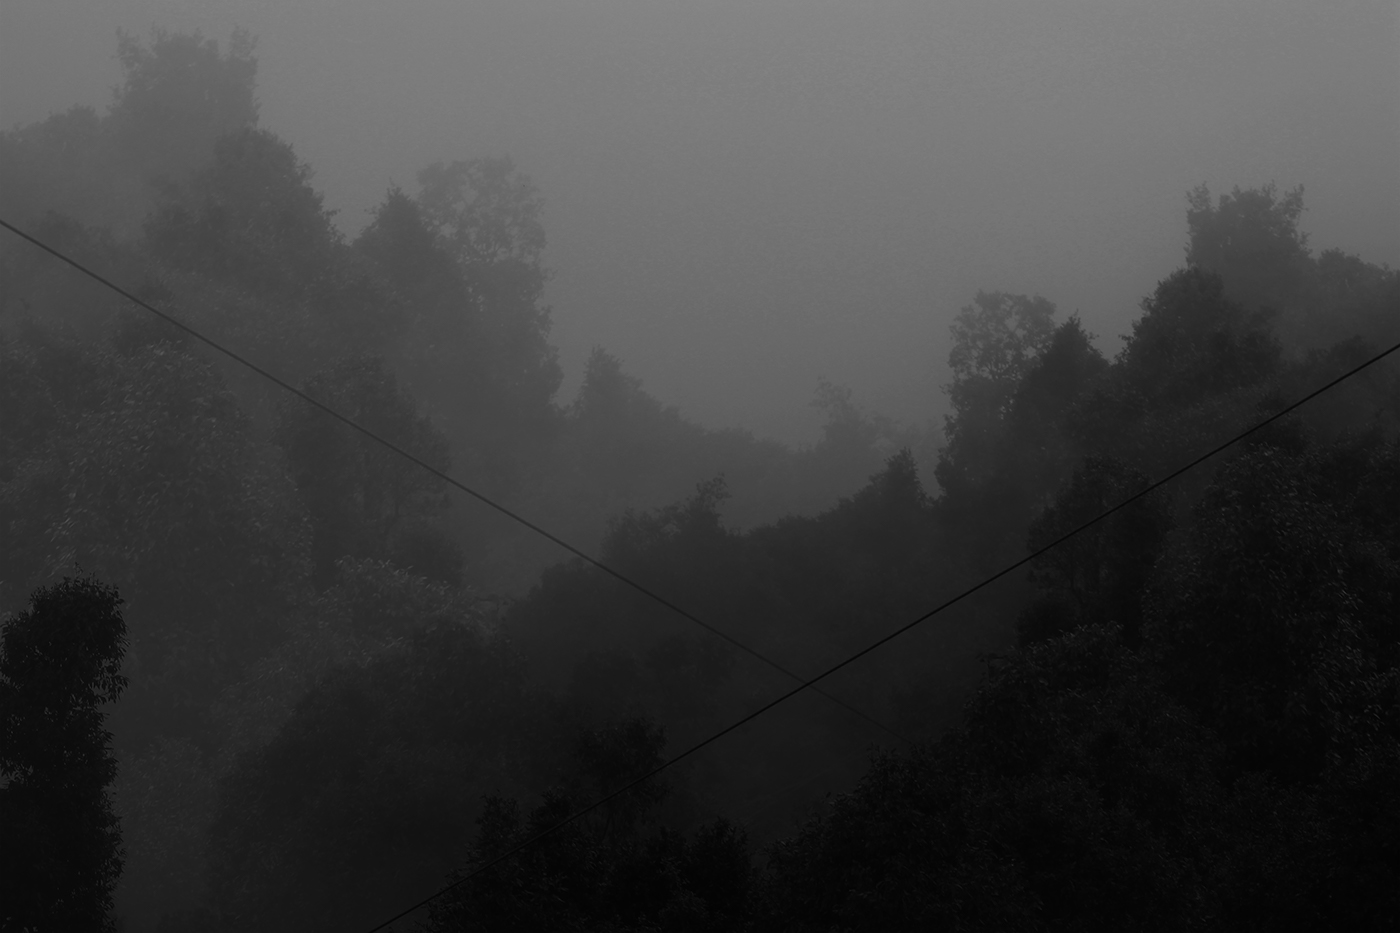 himalayas mountains fog India monsoon summer Himalayan Mountains Landscape grayscale black and white